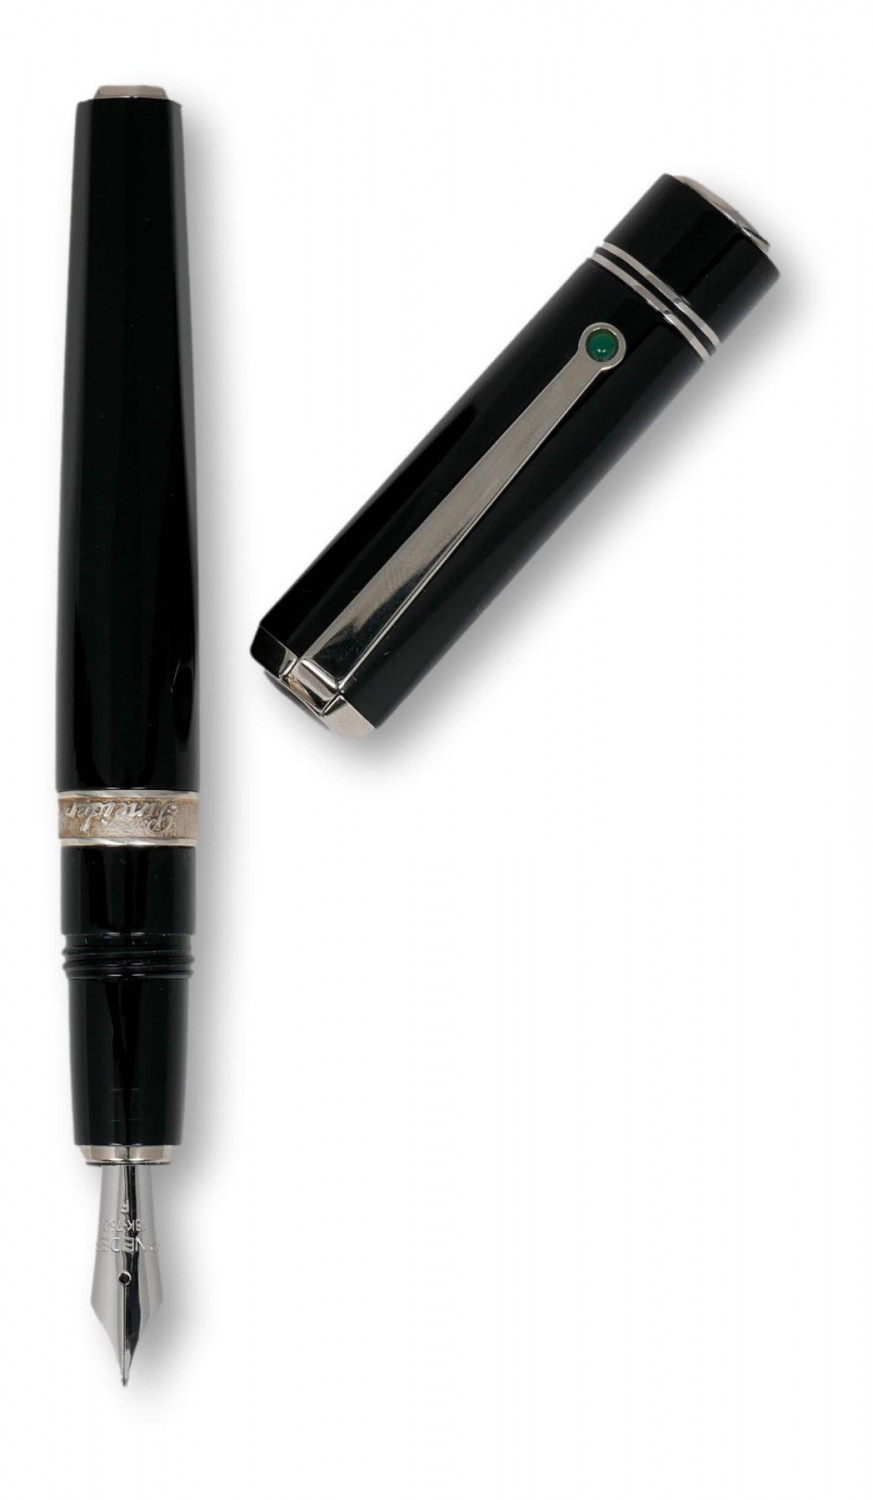 Fountain pen, collection 1949, with silver details and Pineider logo